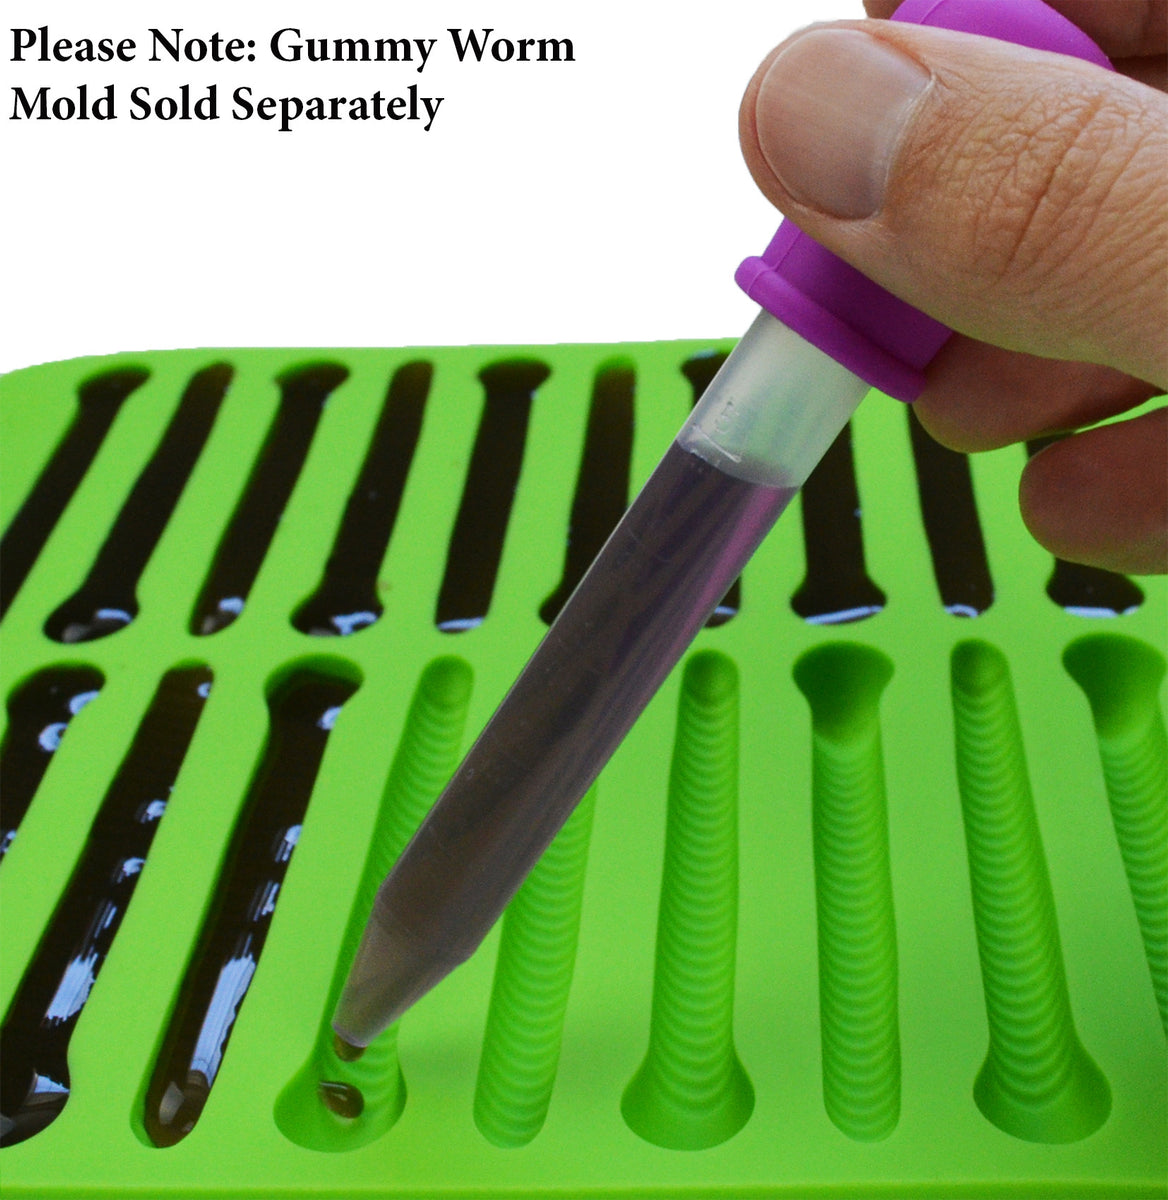 Worm Silicone Mold With Dropper